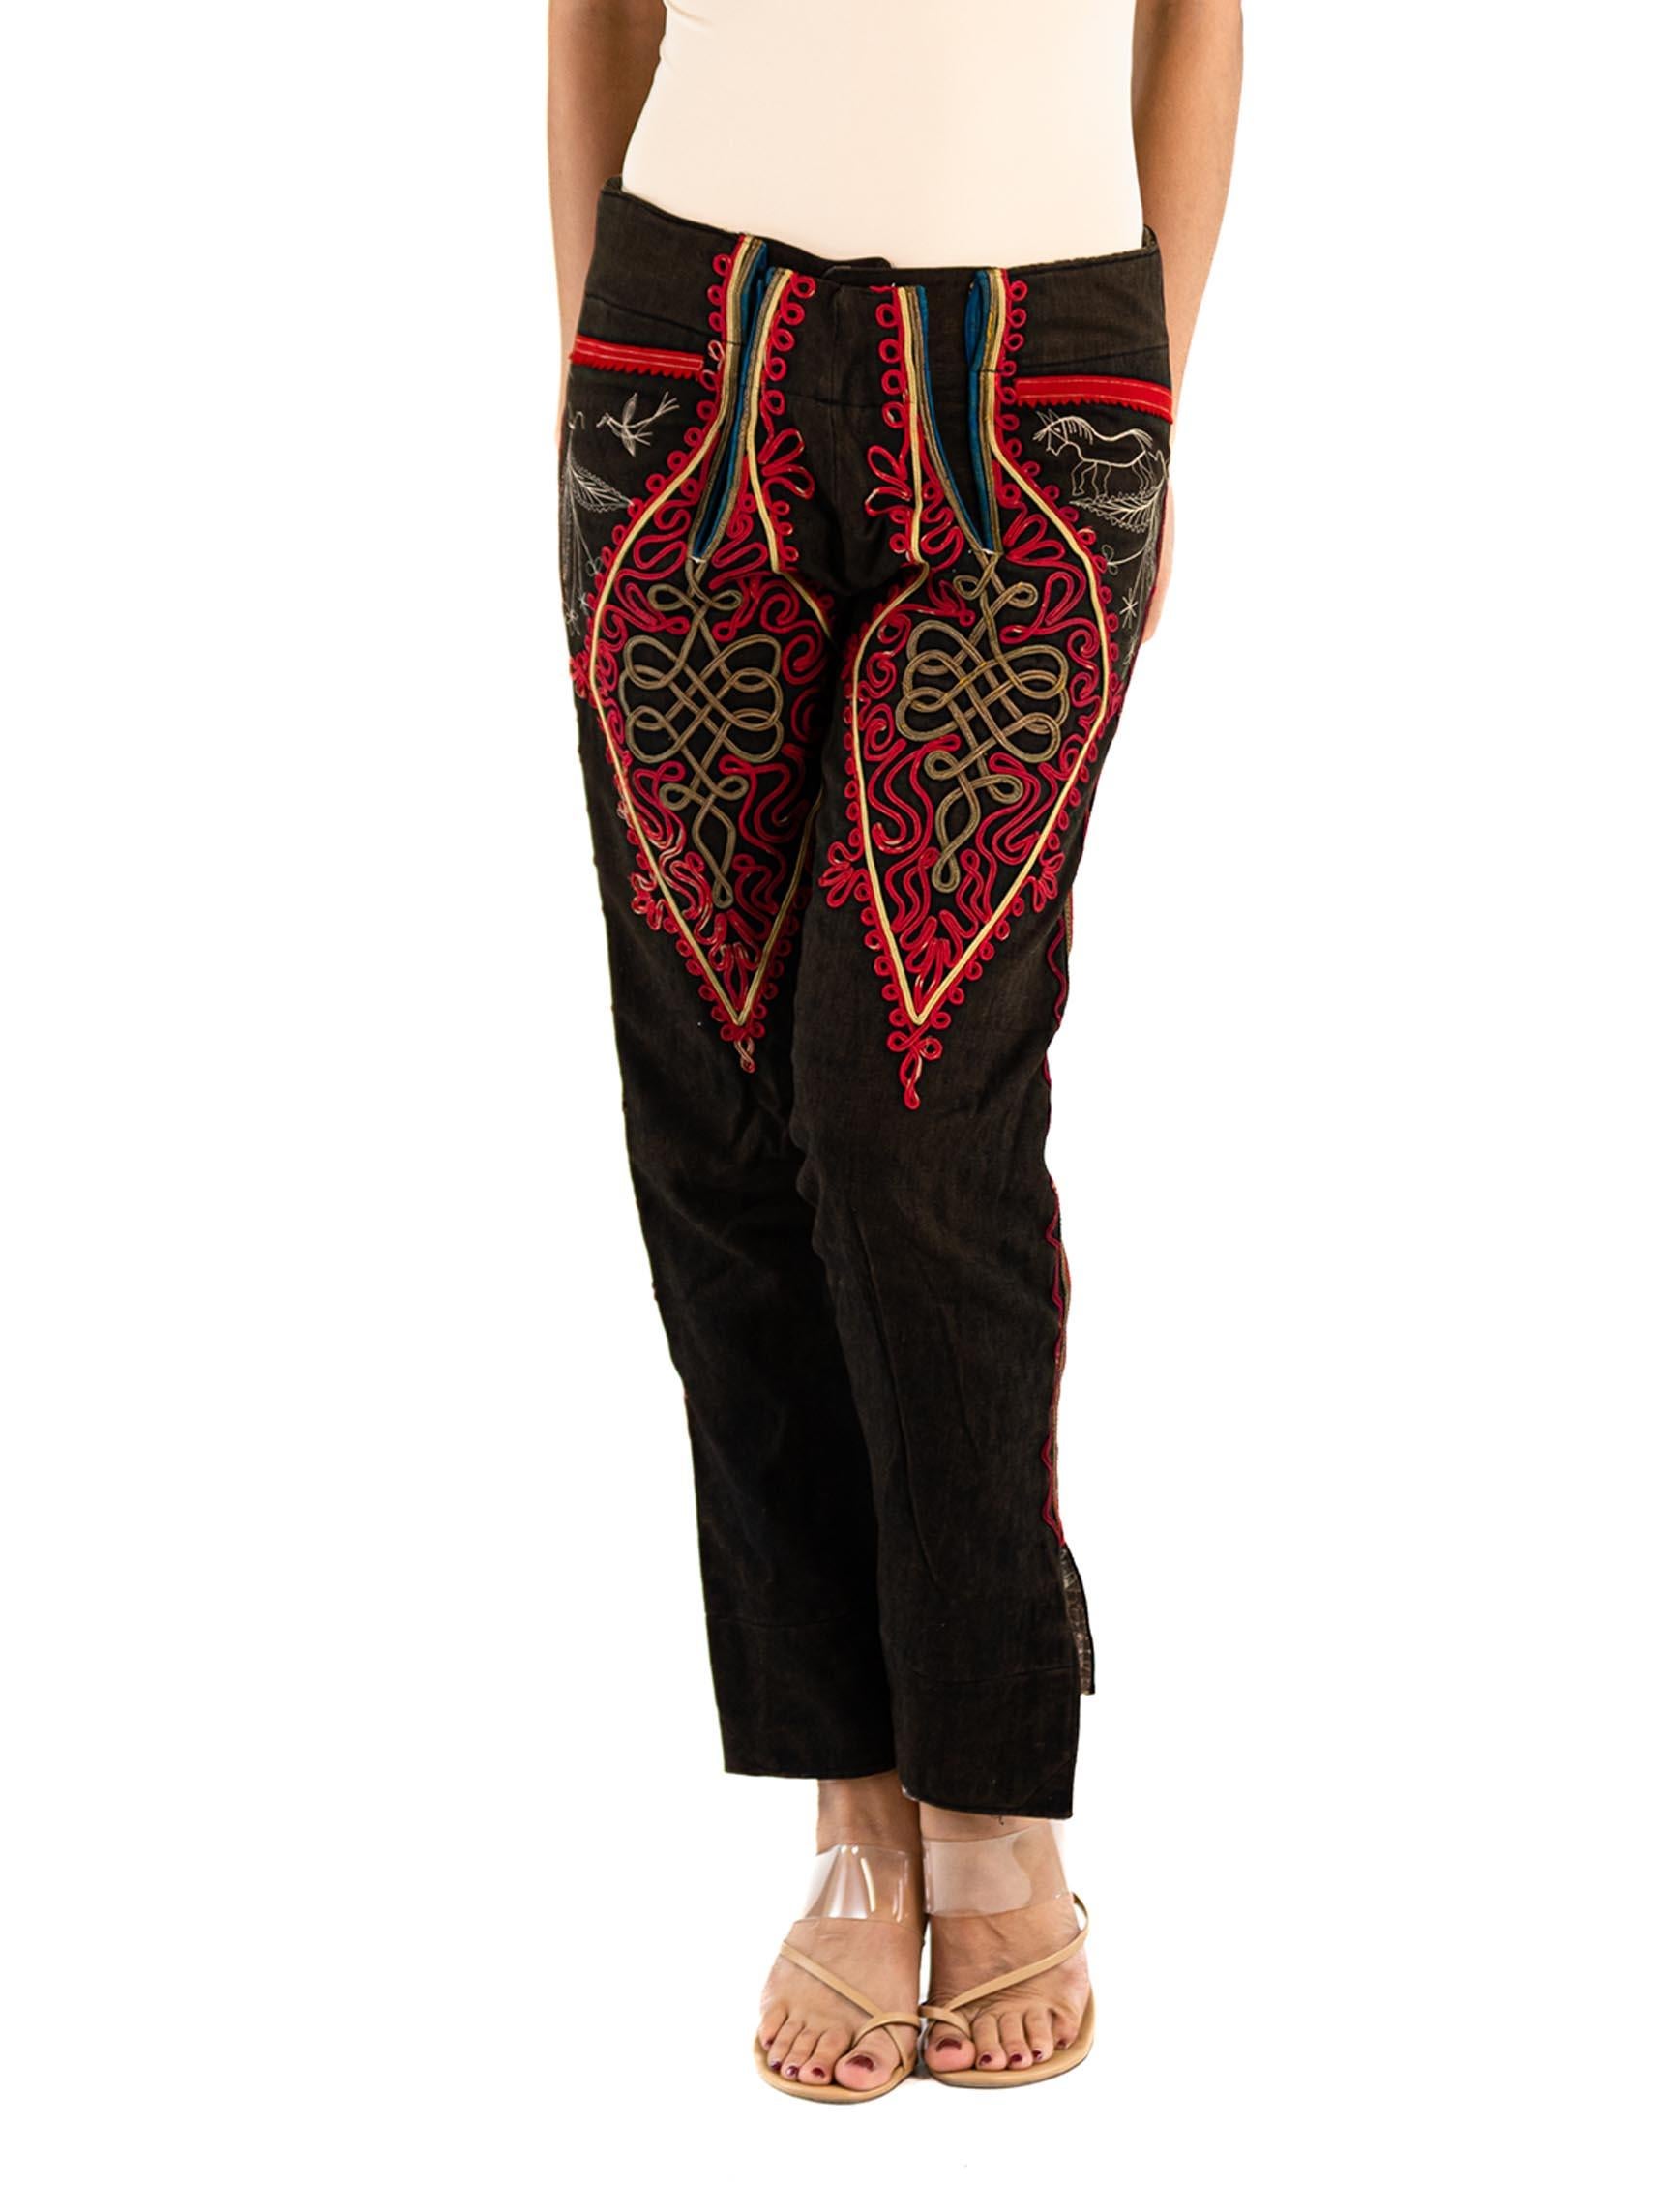 Men's Victorian Brown Antique Wool Folk Pants With Epic Passementrie & Embroidery For Sale